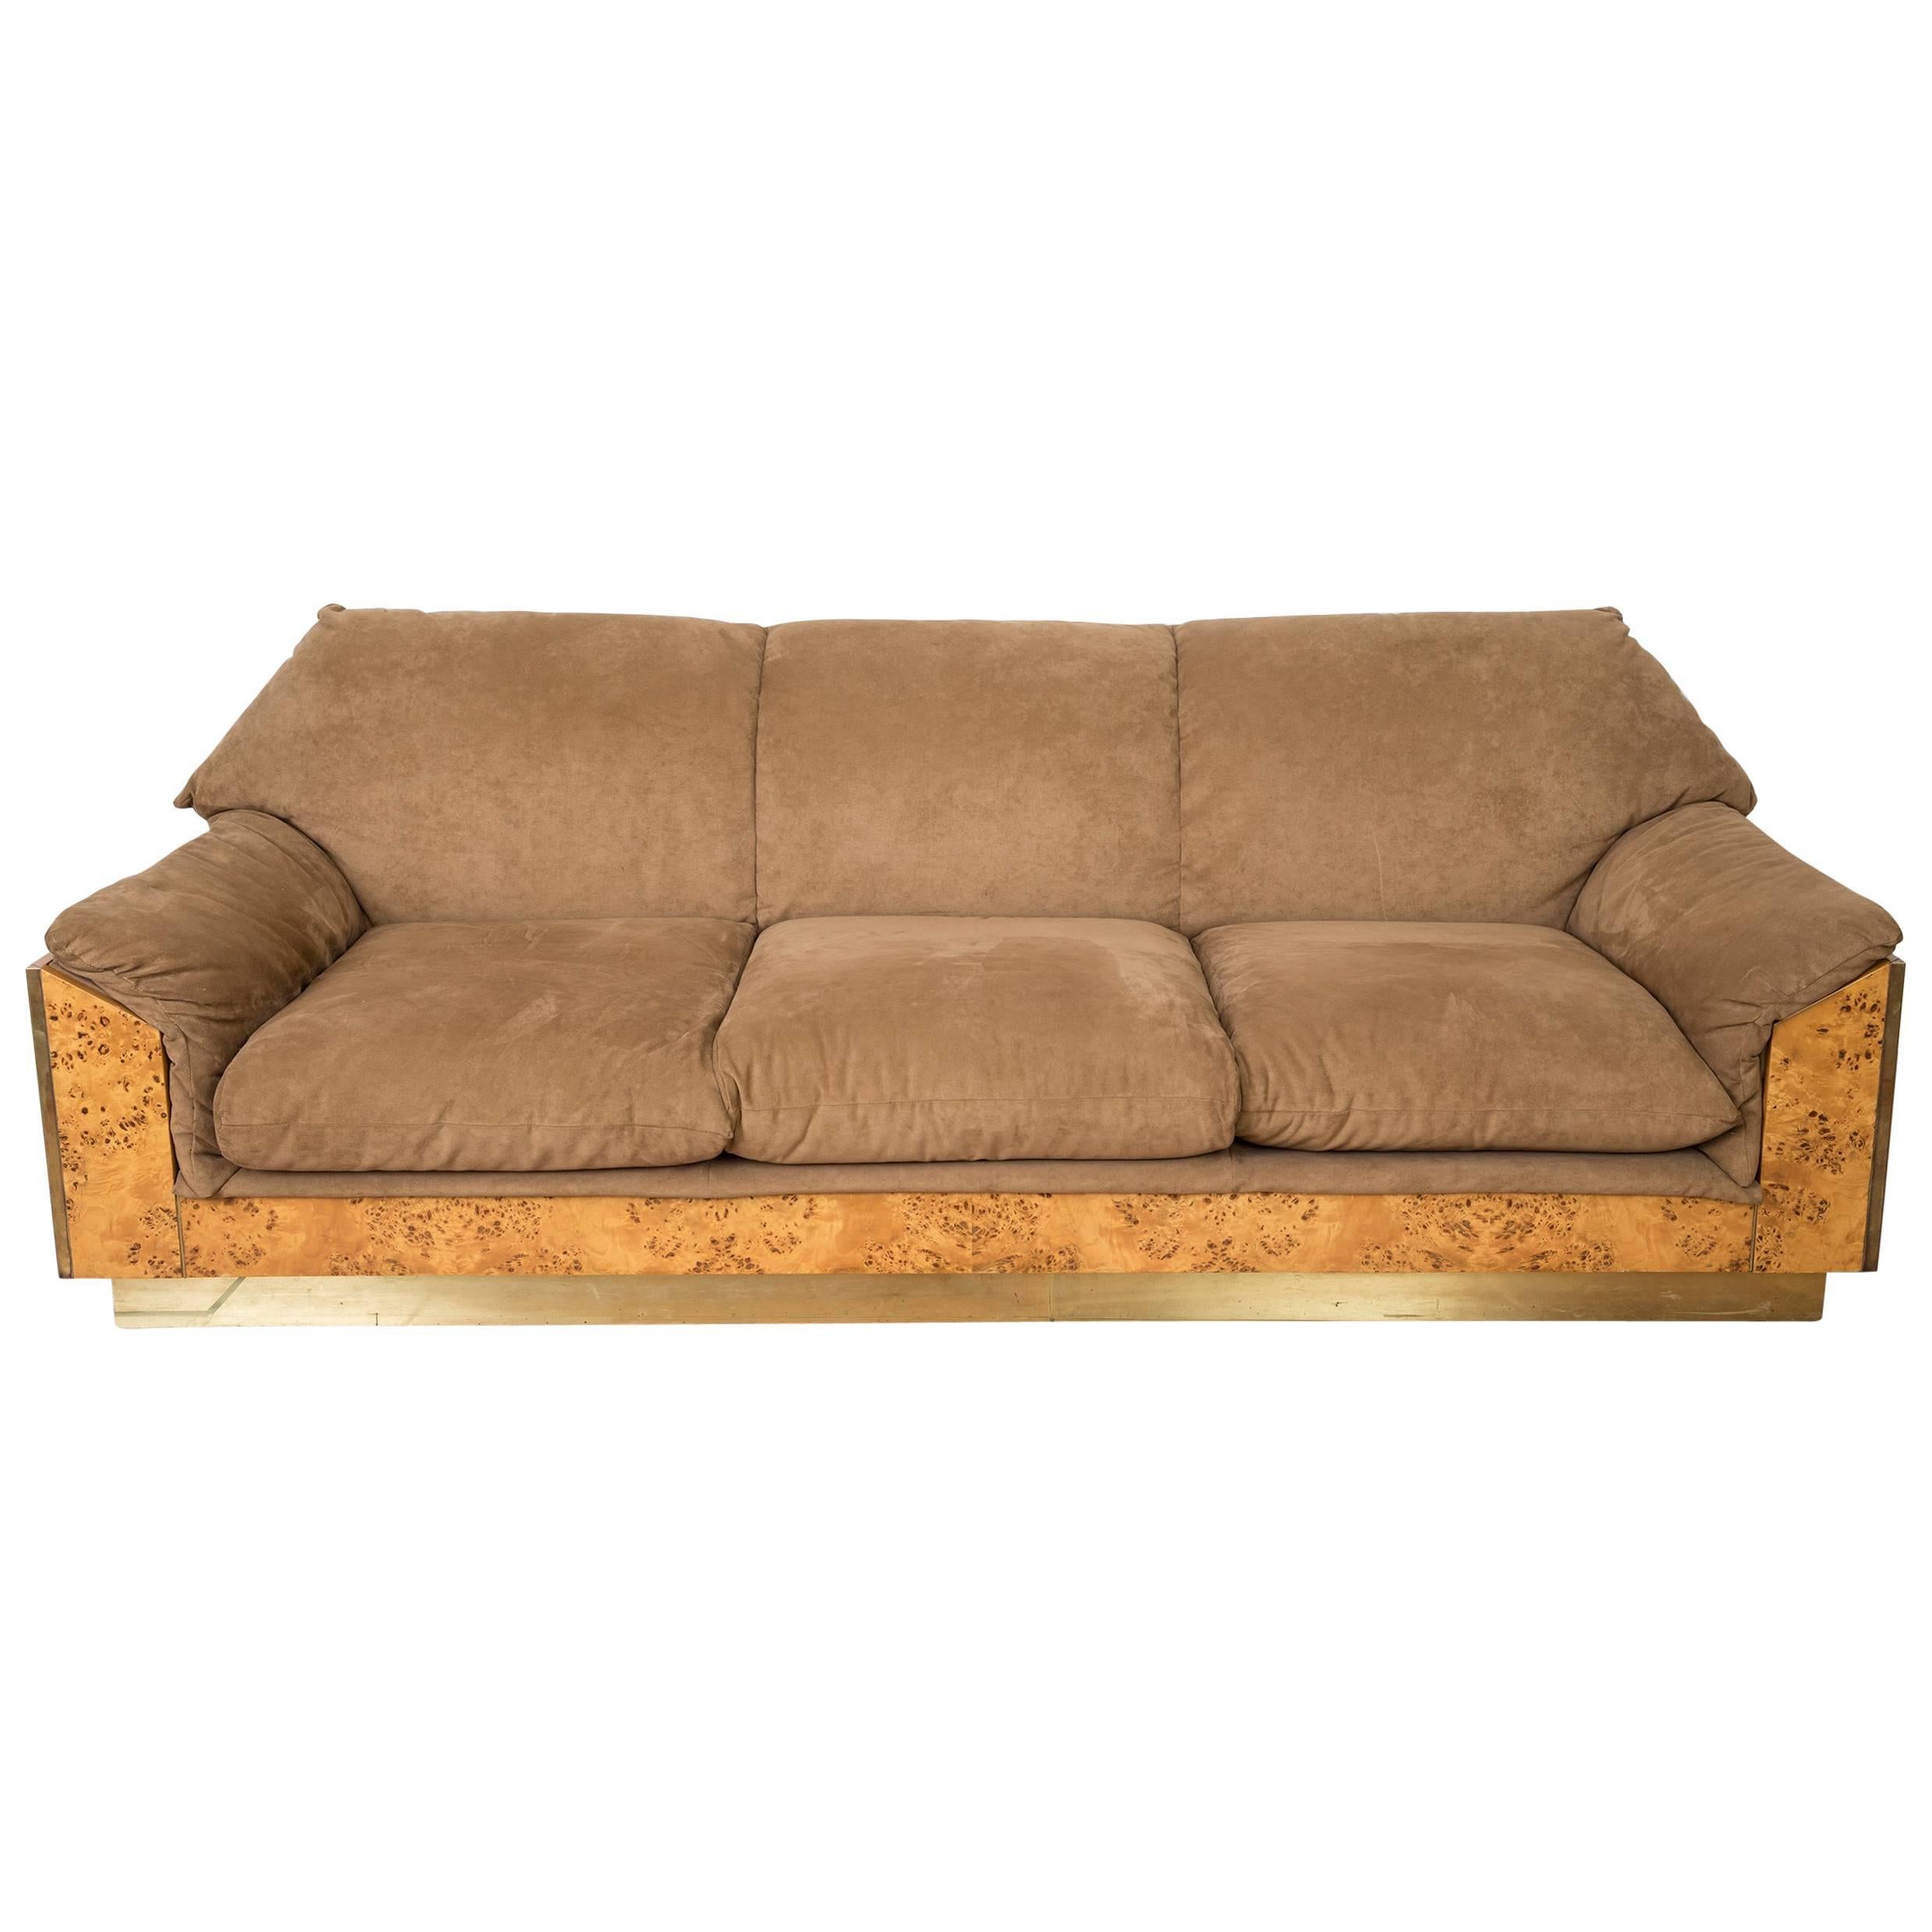 Willy Rizzo Thuja Burl Suede and Brass Italian Sofa, 1970s